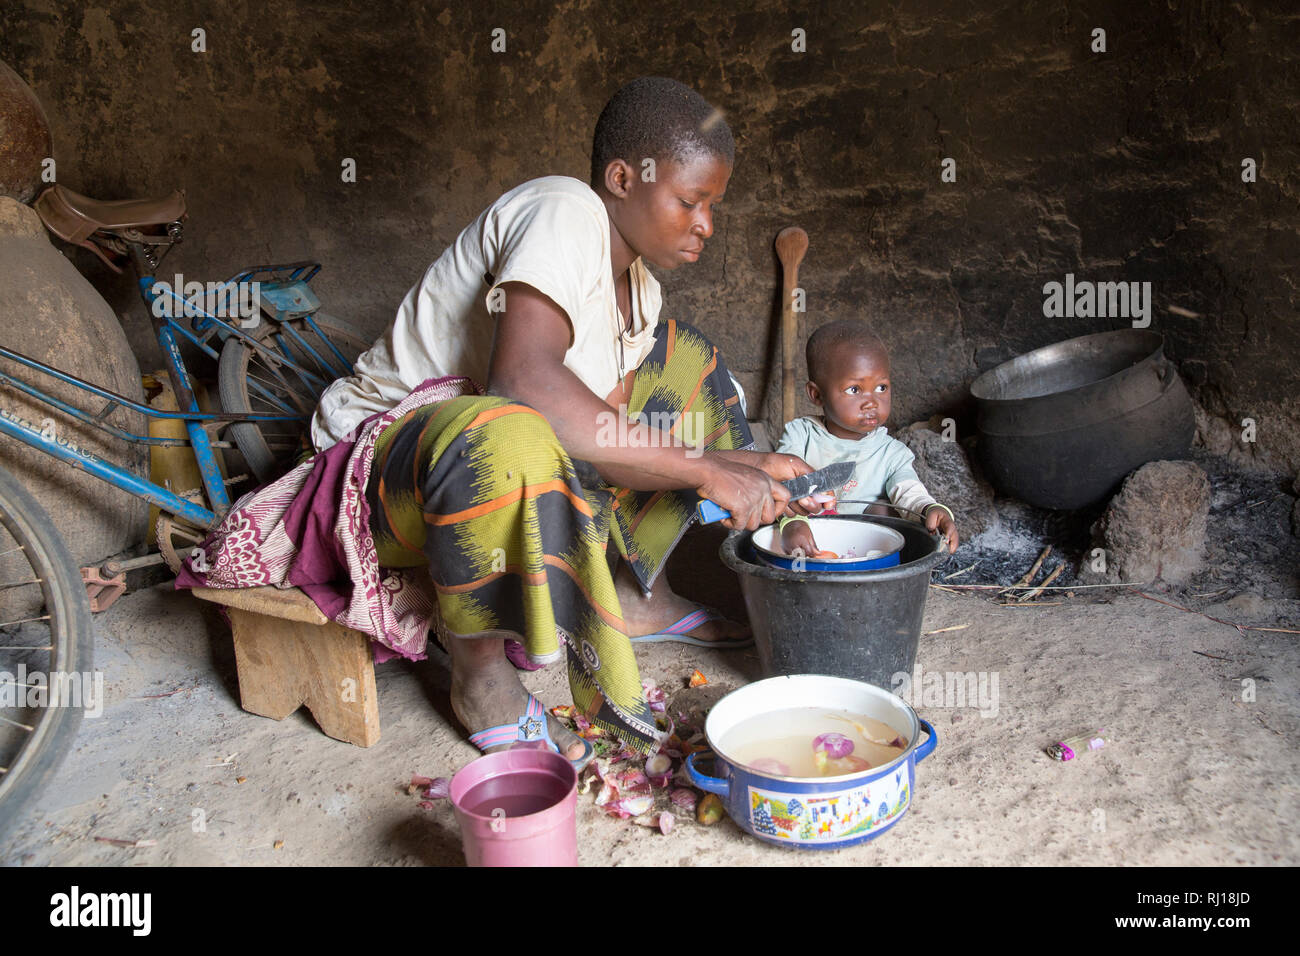 Samba village, Yako Province, Burkina Faso : Collette Guiguemde, 26 with her baby Ornela Divine Zoundi, 18 months, cooks a meal for her children and her parents-in-law with the okra she has just harvested, and makes a sorghum porridge or Tao. Stock Photo